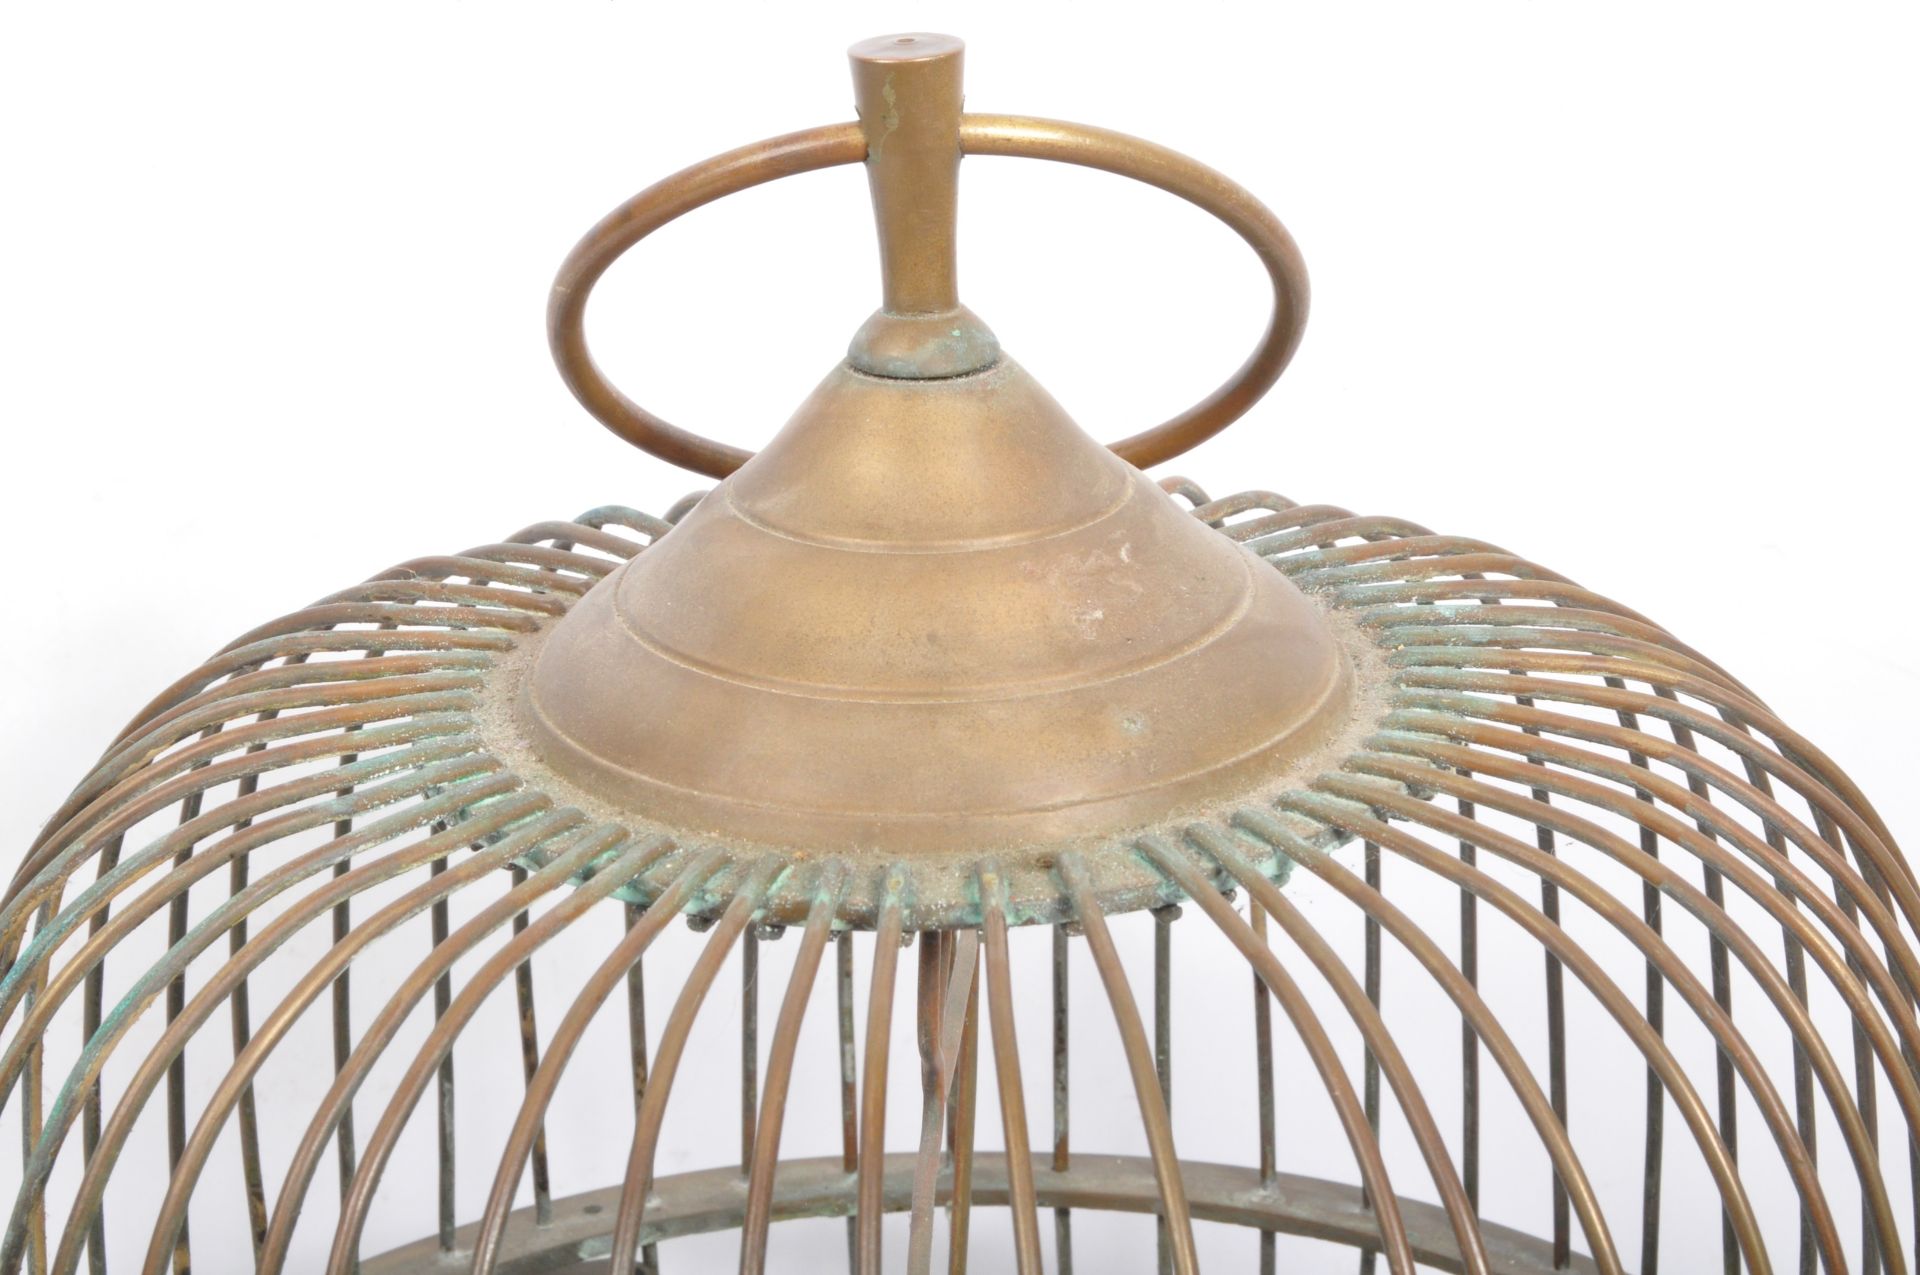 EARLY 20TH CENTURY BRASS DOME SHAPED BIRDCAGE - Image 4 of 5